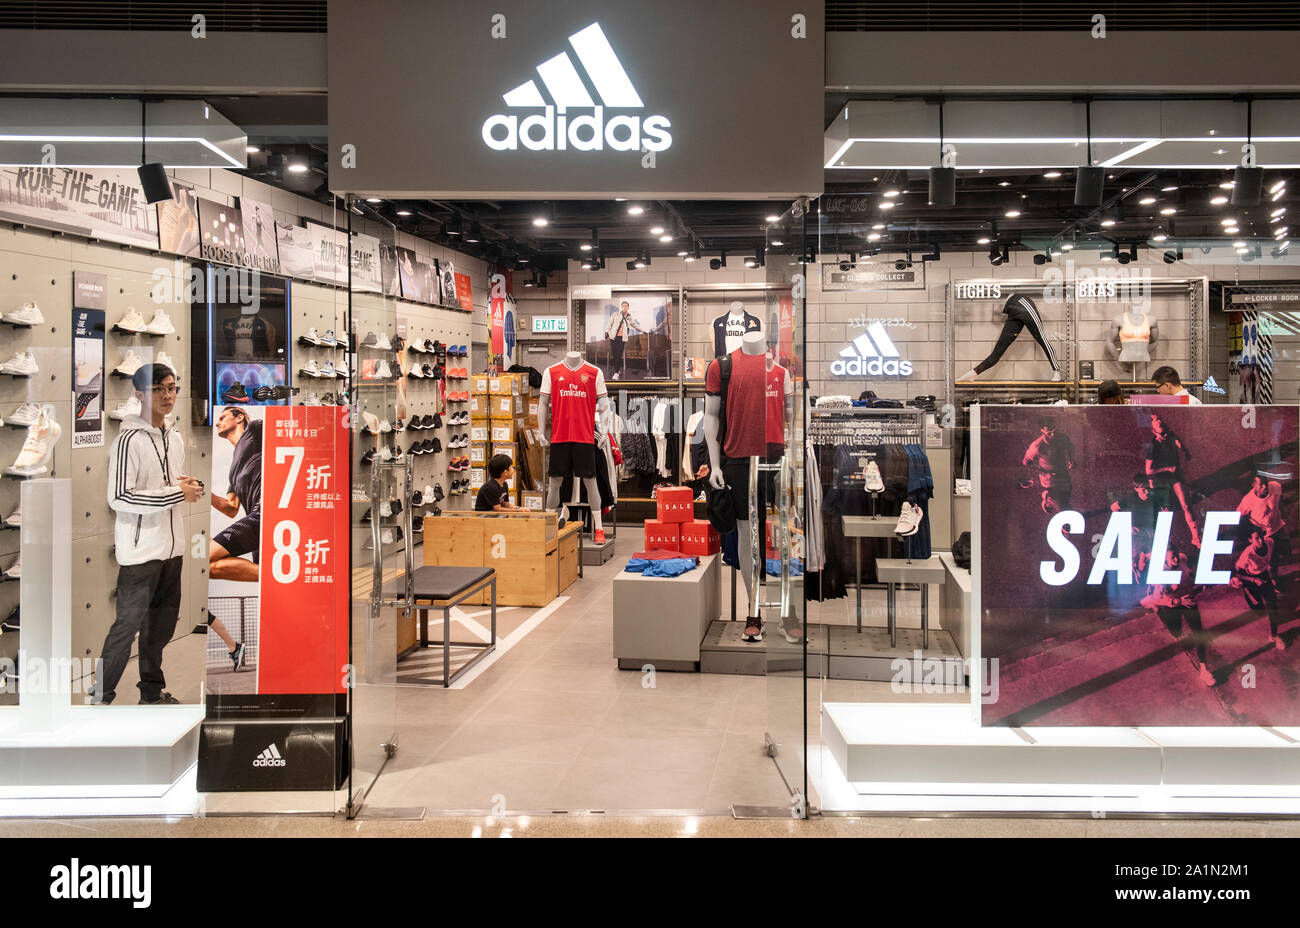 adidas outlet memorial day sale